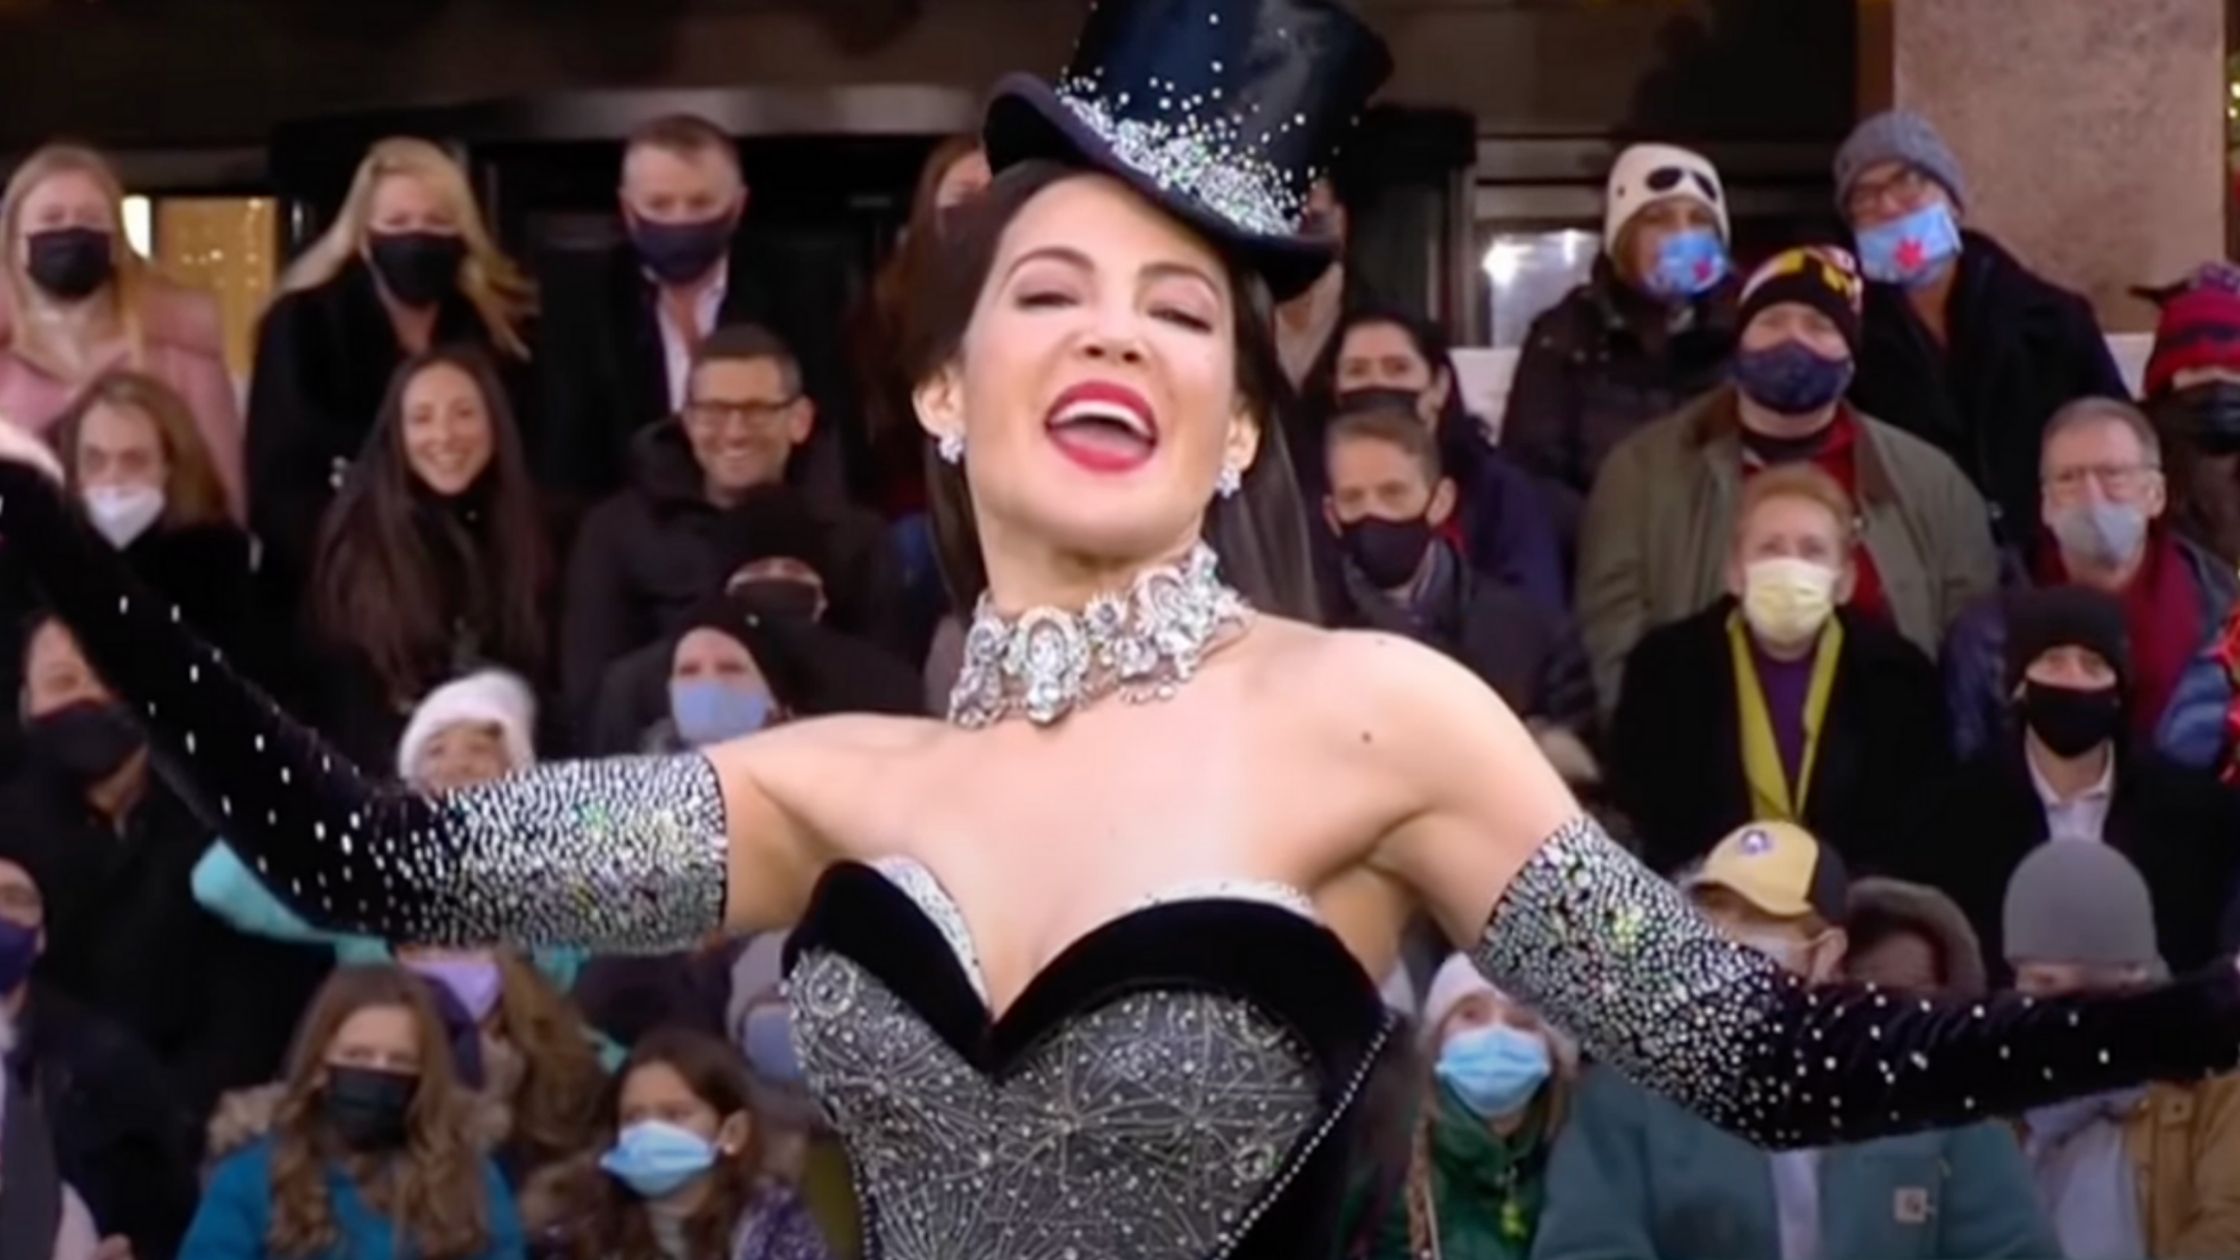 WATCH: â€˜Sixâ€™, â€˜Wickedâ€™, â€˜Moulin Rougeâ€™, and More Performances from the Macyâ€™s Thanksgiving Day Parade